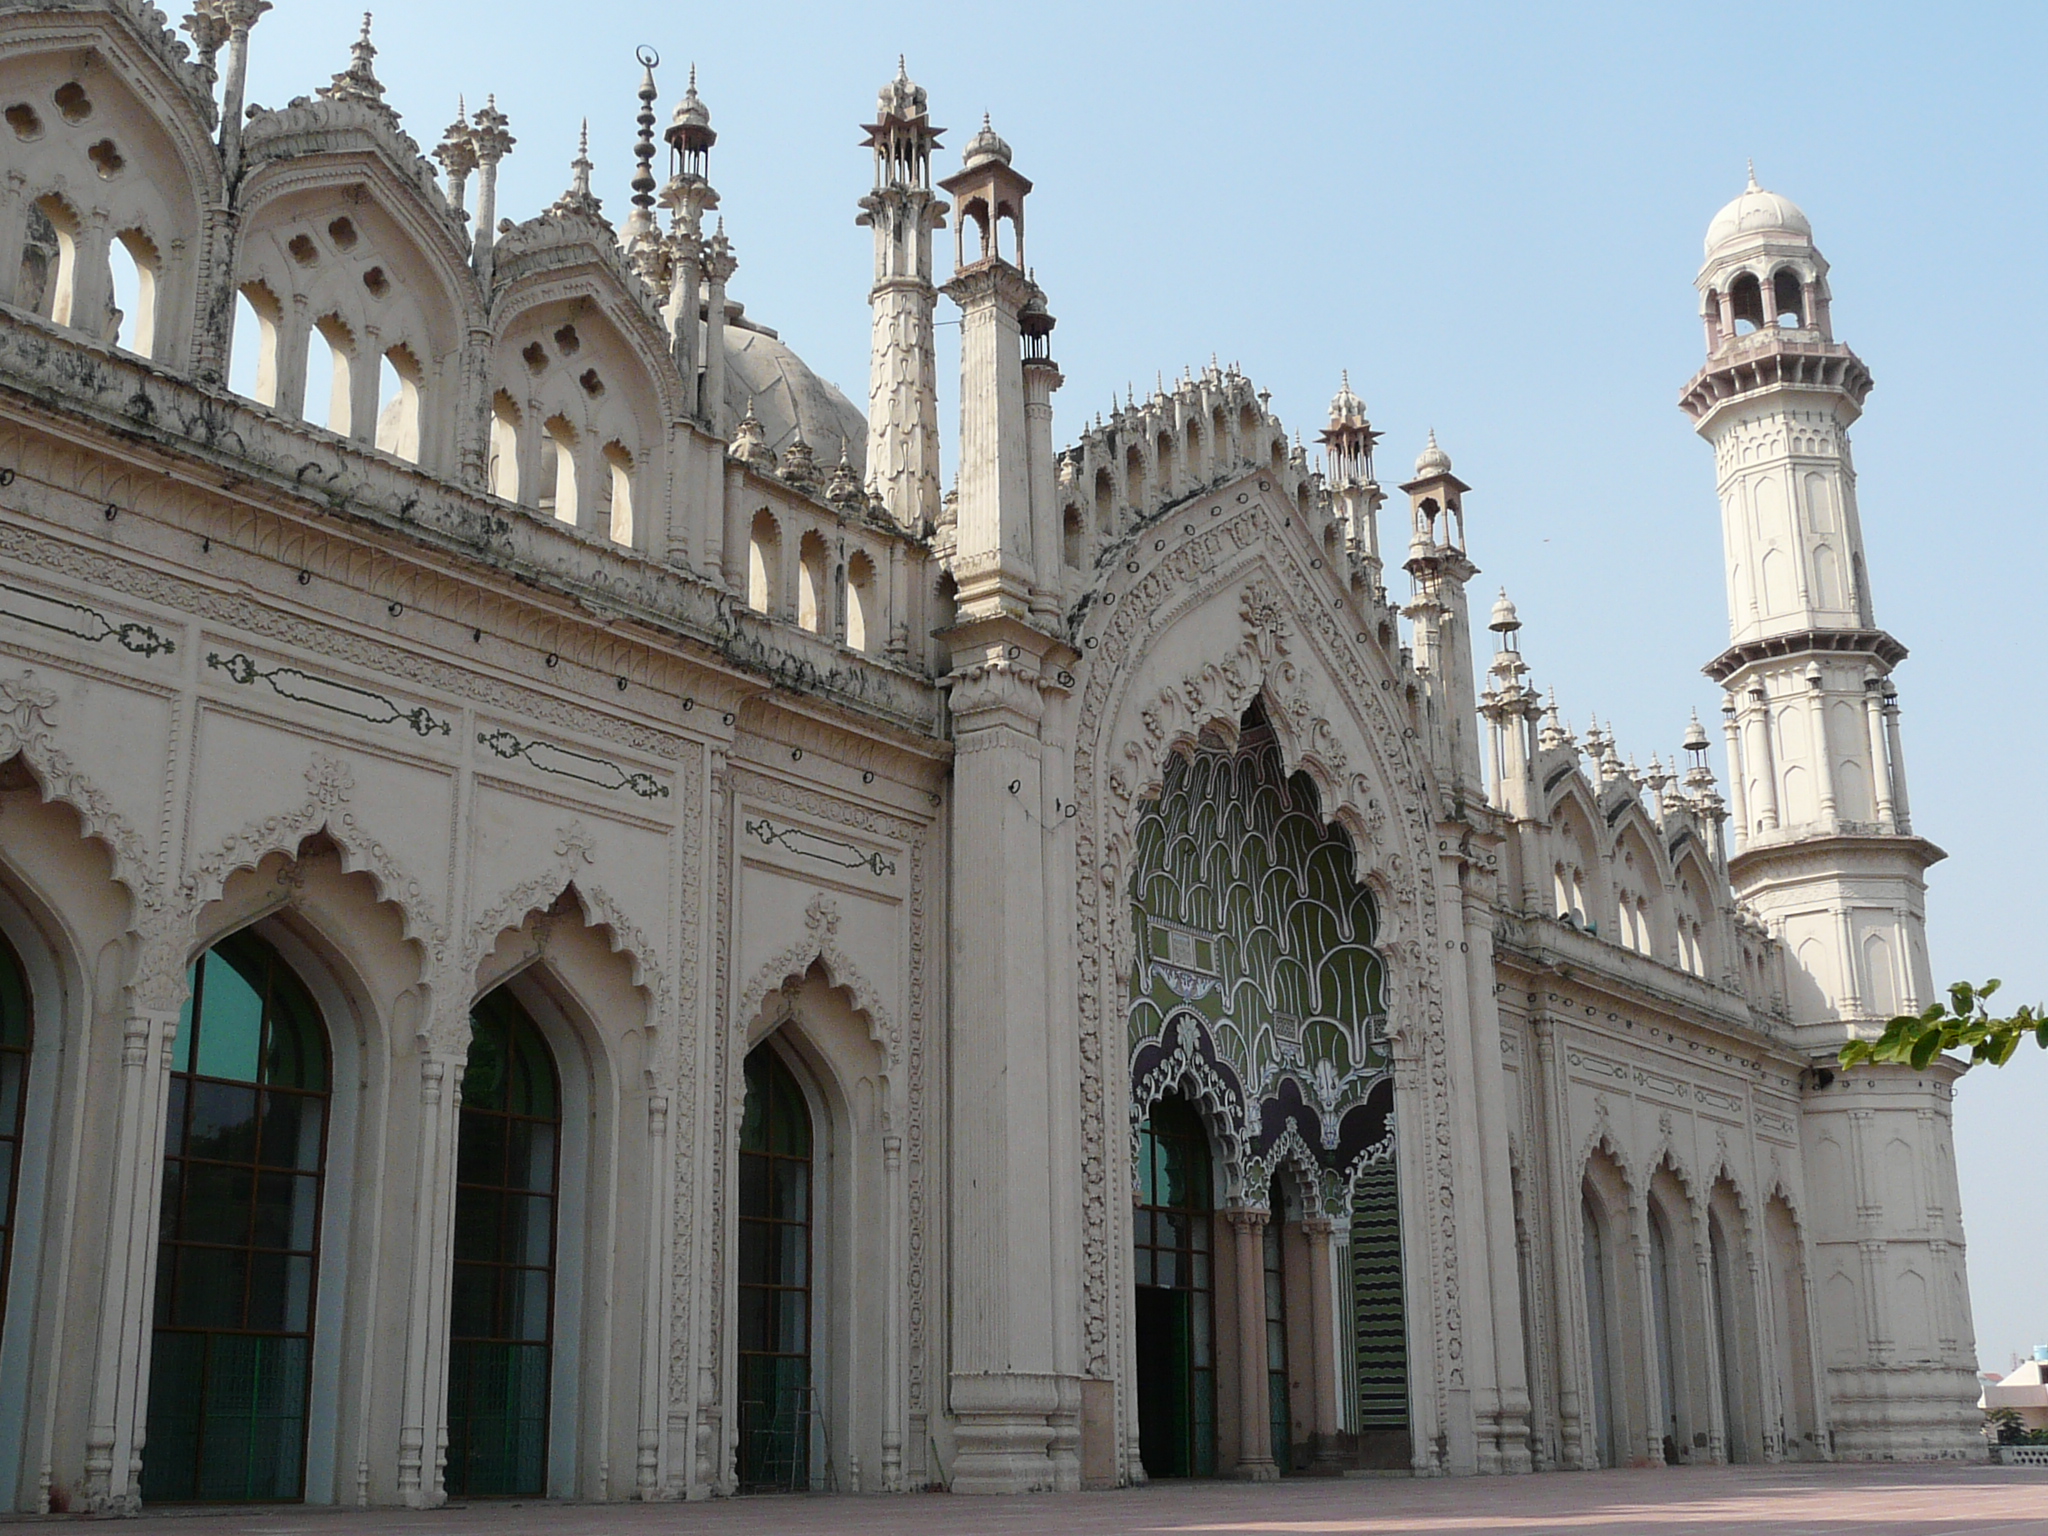 [Image of Jama Masjid in Lucknow]